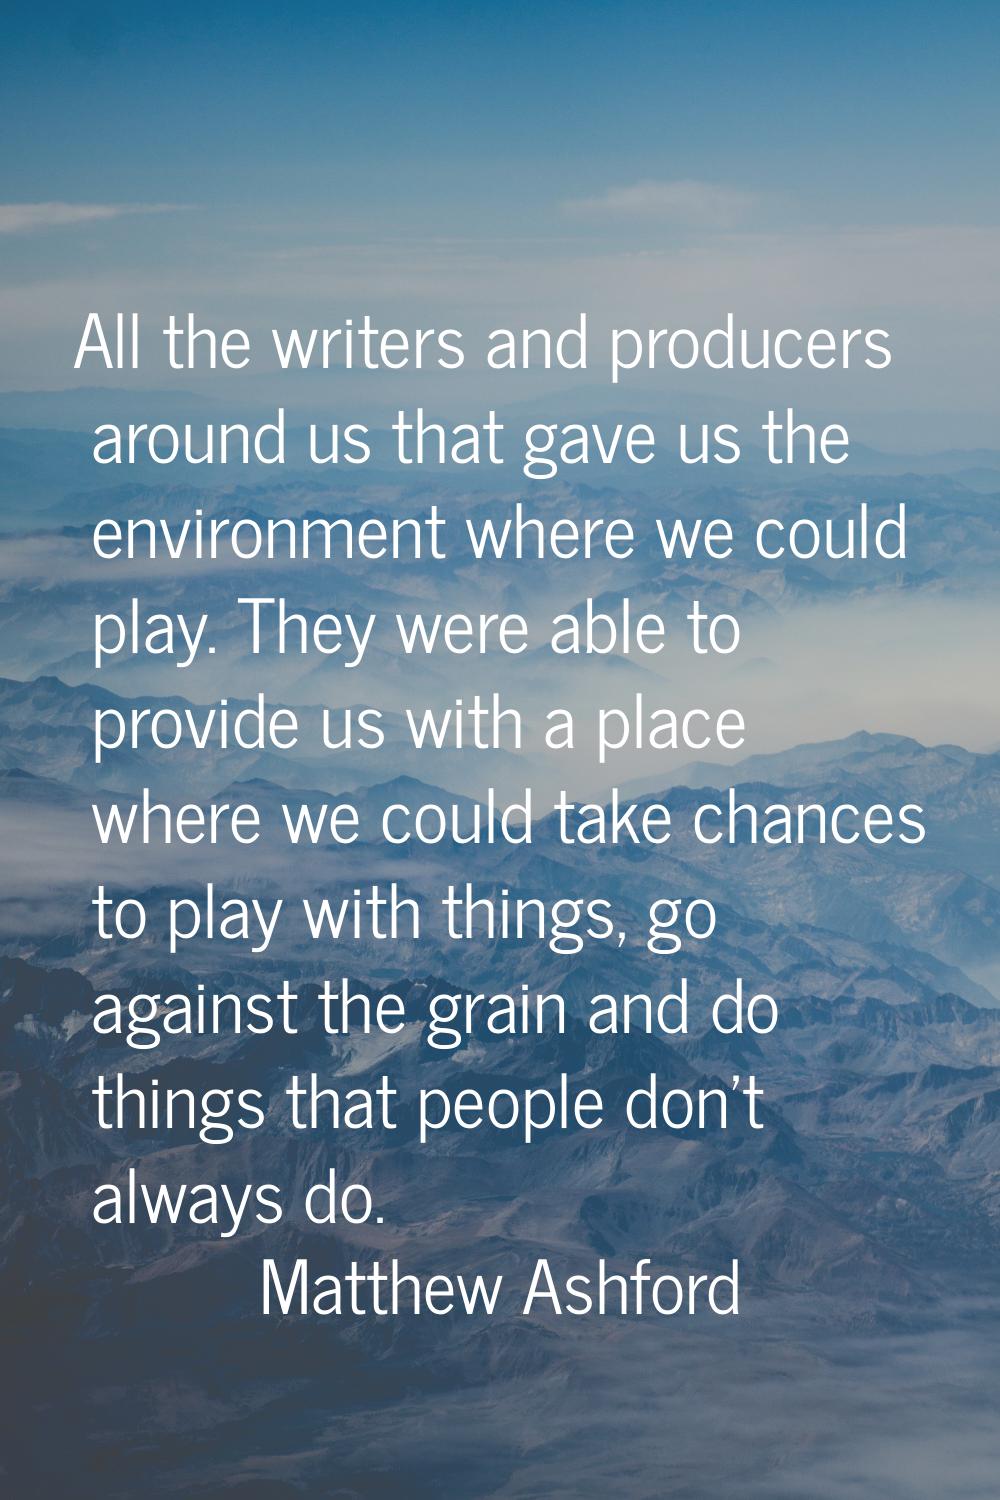 All the writers and producers around us that gave us the environment where we could play. They were